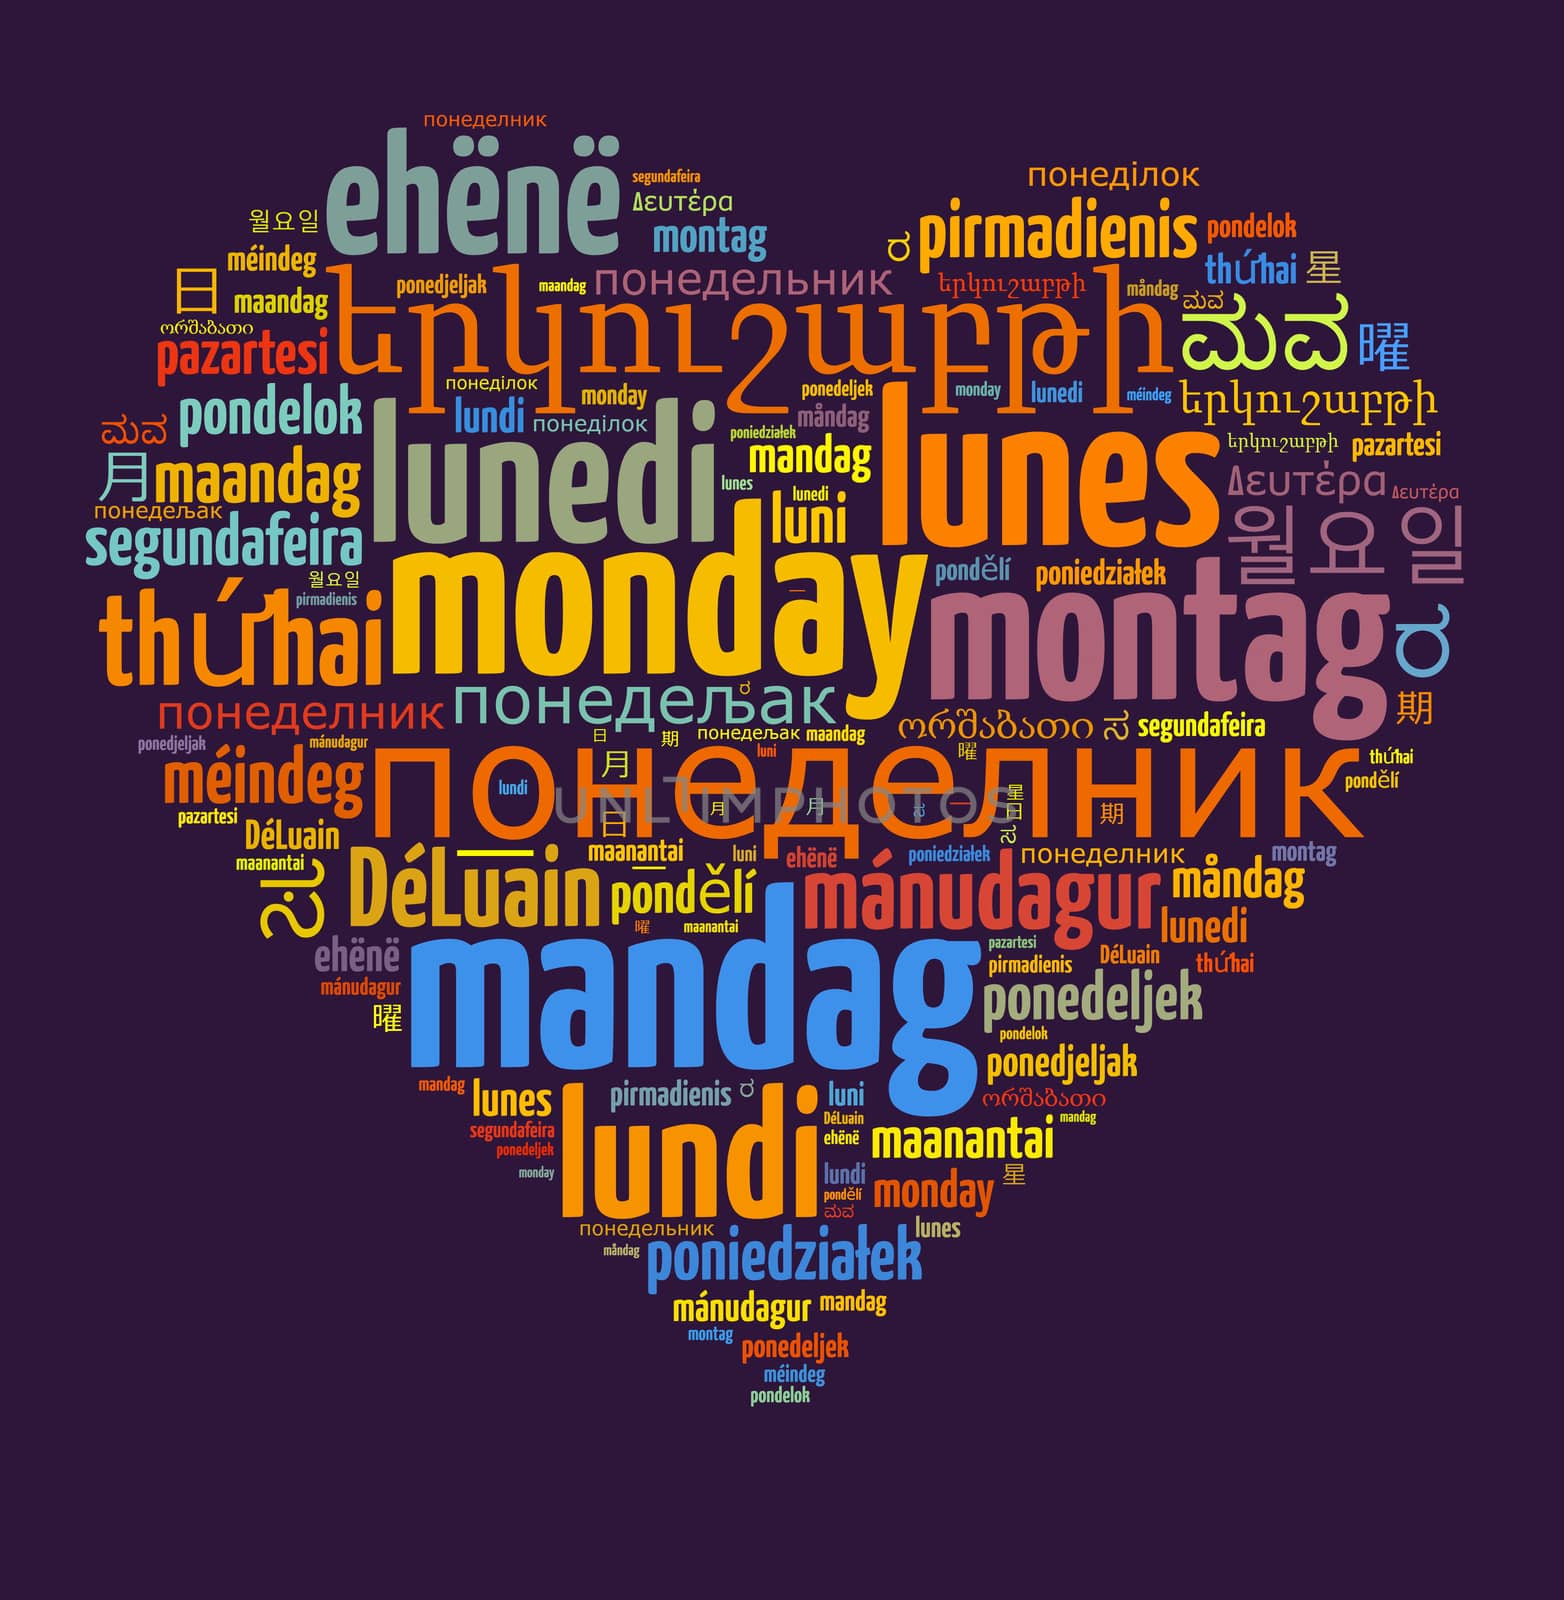 Word Monday in different languages by eenevski